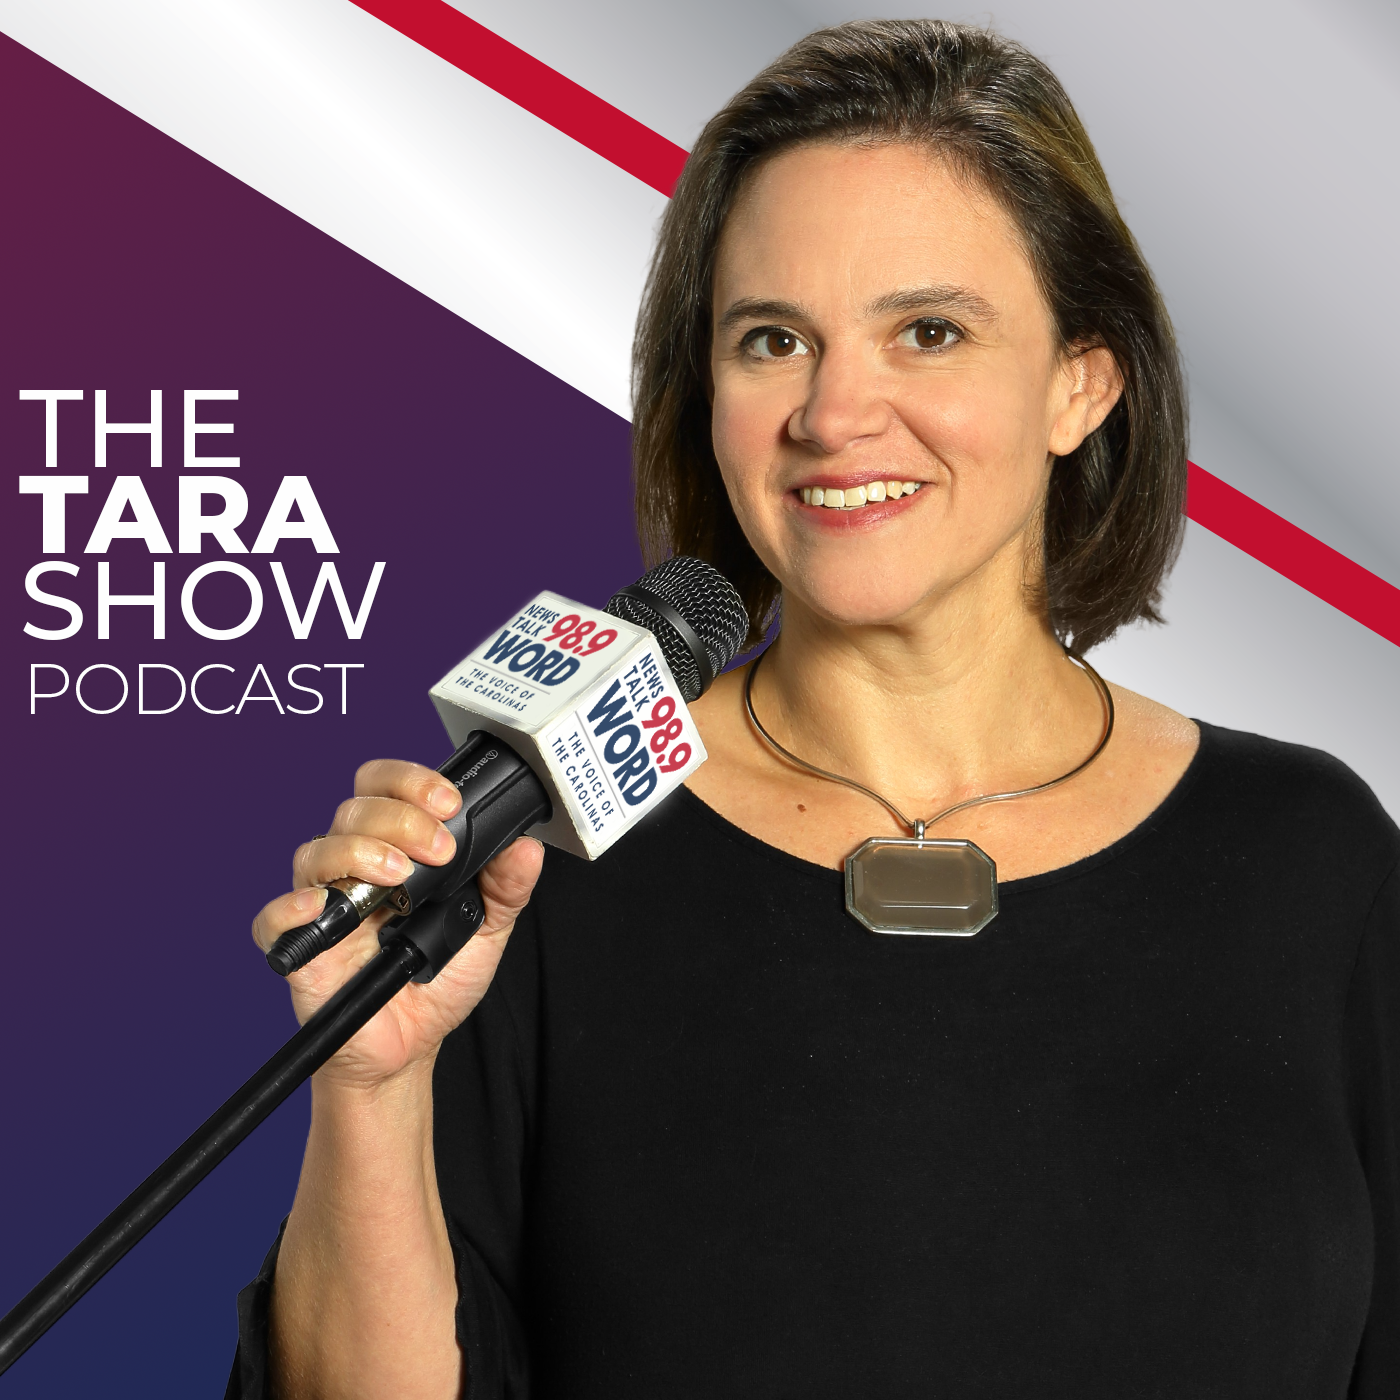 Hour 4: The Tara Show - “Fighting for Jews with Adam Guillette” “Plasmic Echo | Surveilling Donal Trump” “An Economic Recession on the Horizon” “Elon Musk Fight for Freedom of Speech” 